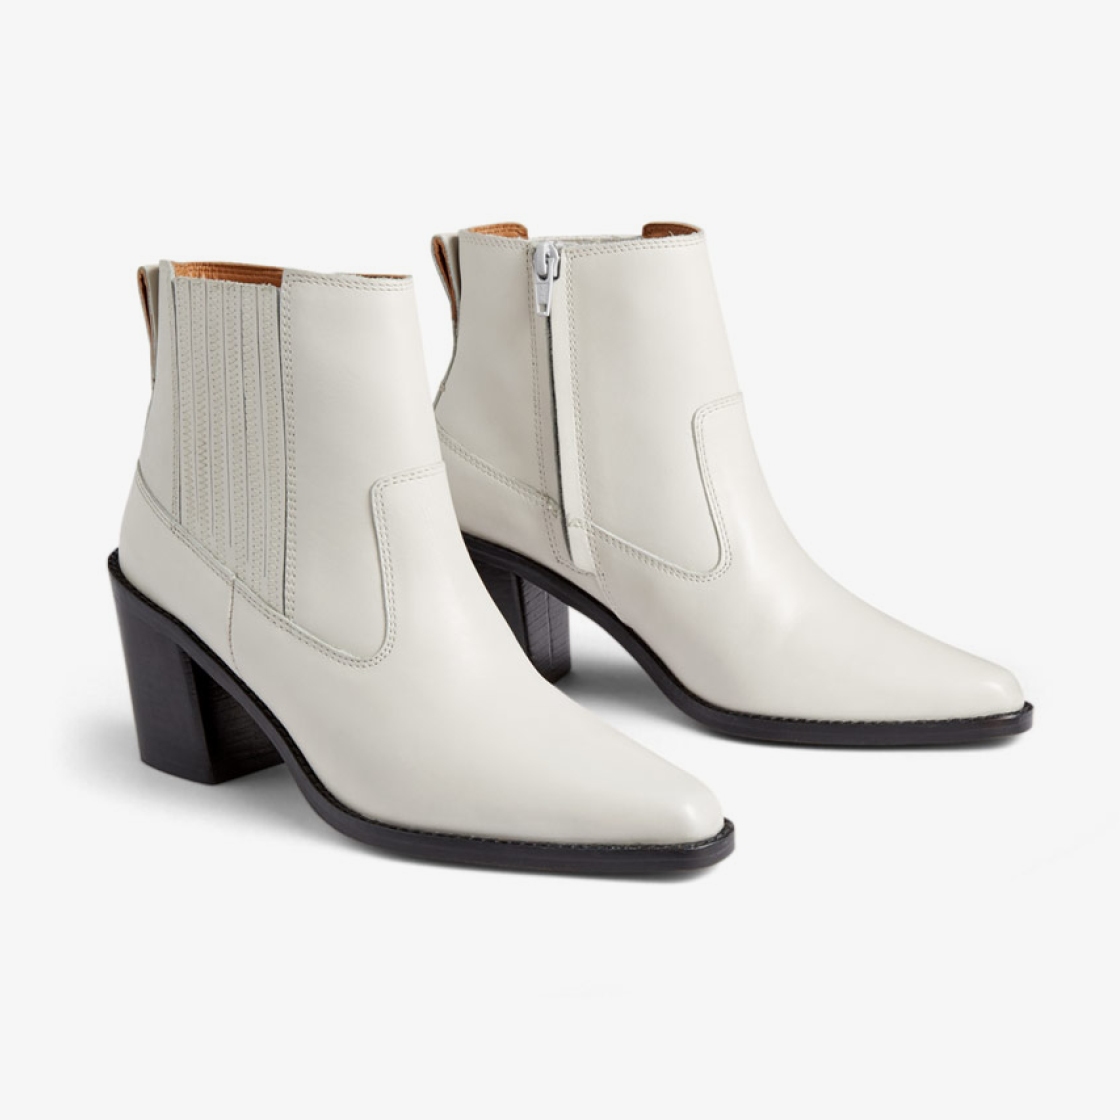 Best white ankle boots for spring 2020